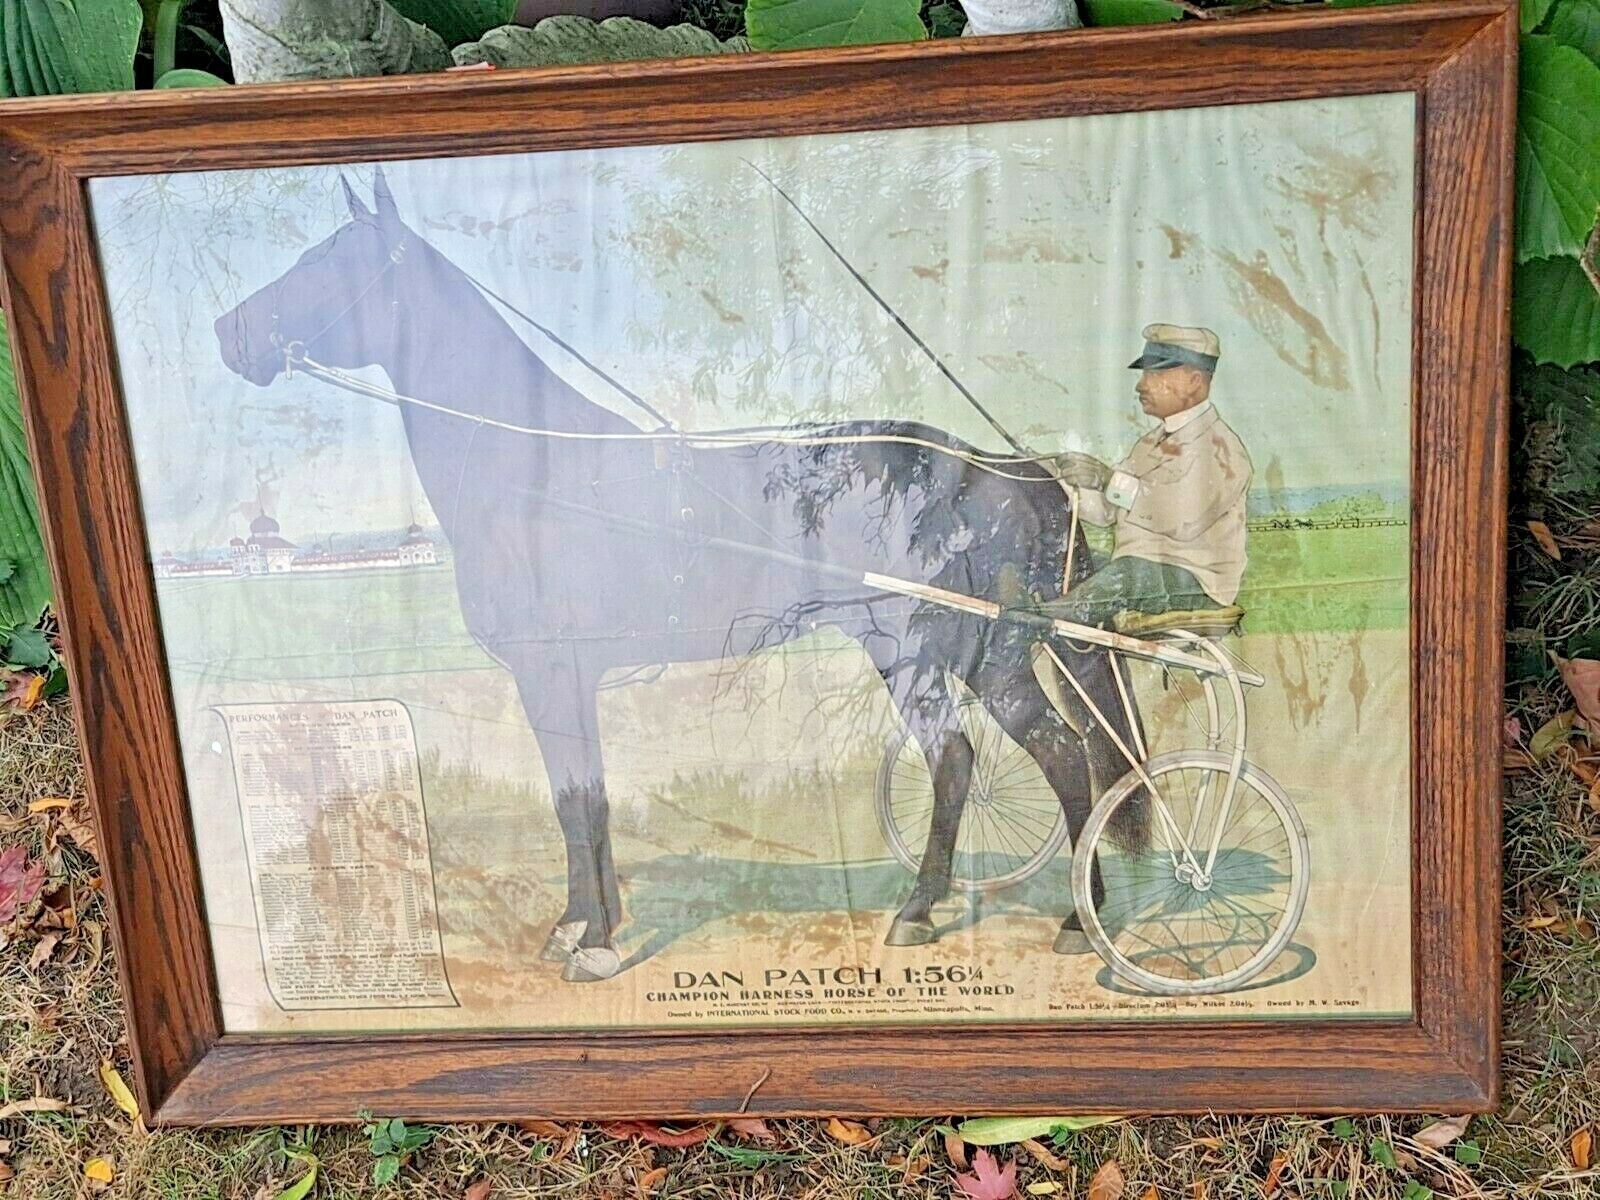 Primary image for Dan Patch 1:56 Antique Framed Print Racing Horse Possible canvas or Cloth